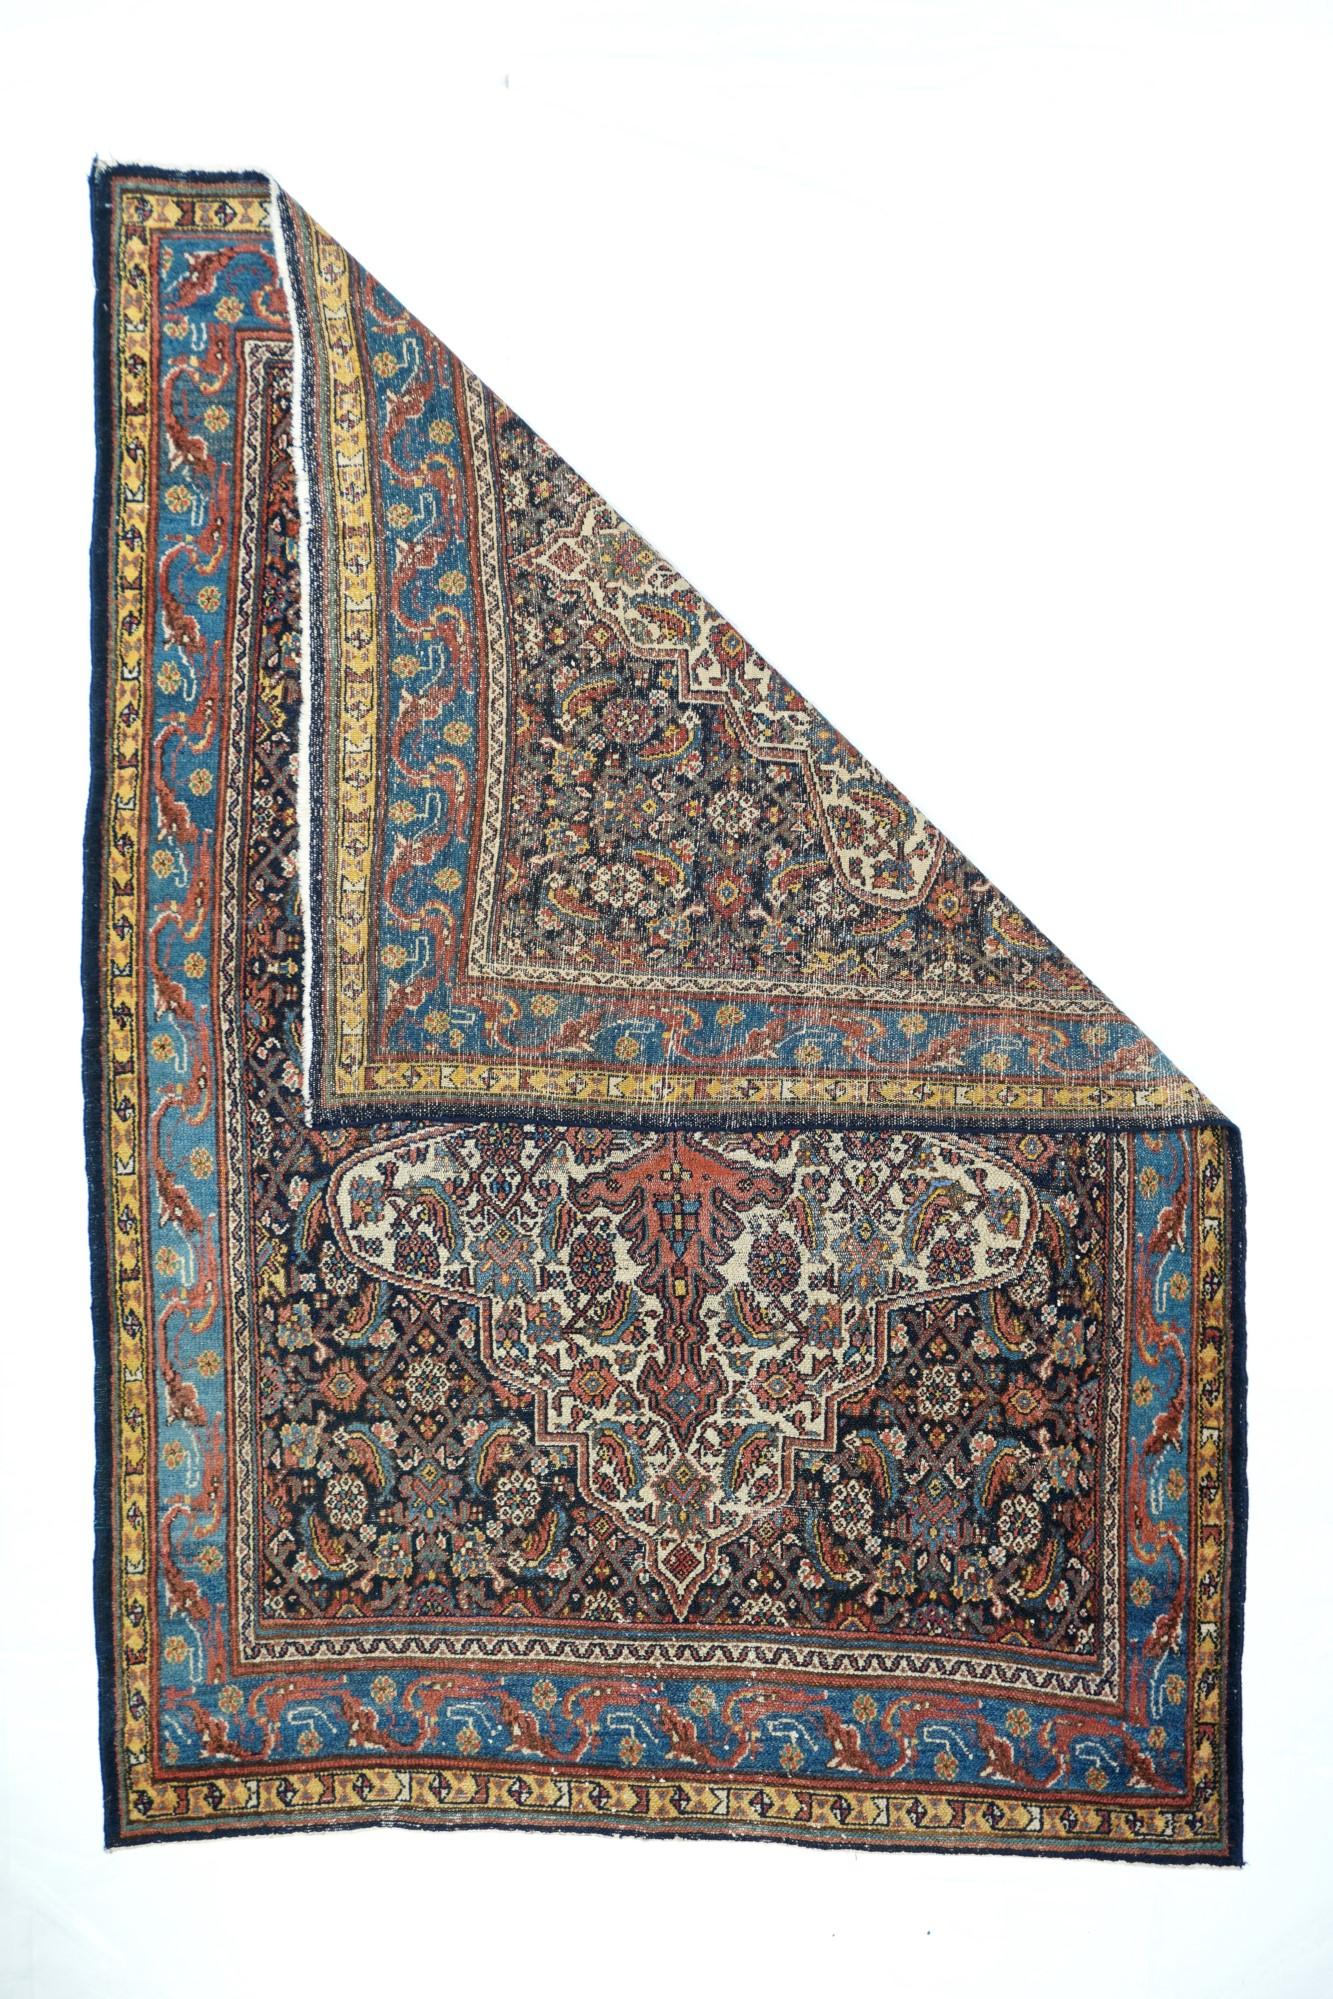 Antique Bibikabad rug measures 4'9'' x 6'9''. From the Greater Hamadan Weaving Area, this rather uncommon Bibikabad antique scartter shows a stepped and deeply lobed ivory cartouche subfield centred by a tall, multiply pendanted pole medallion, all